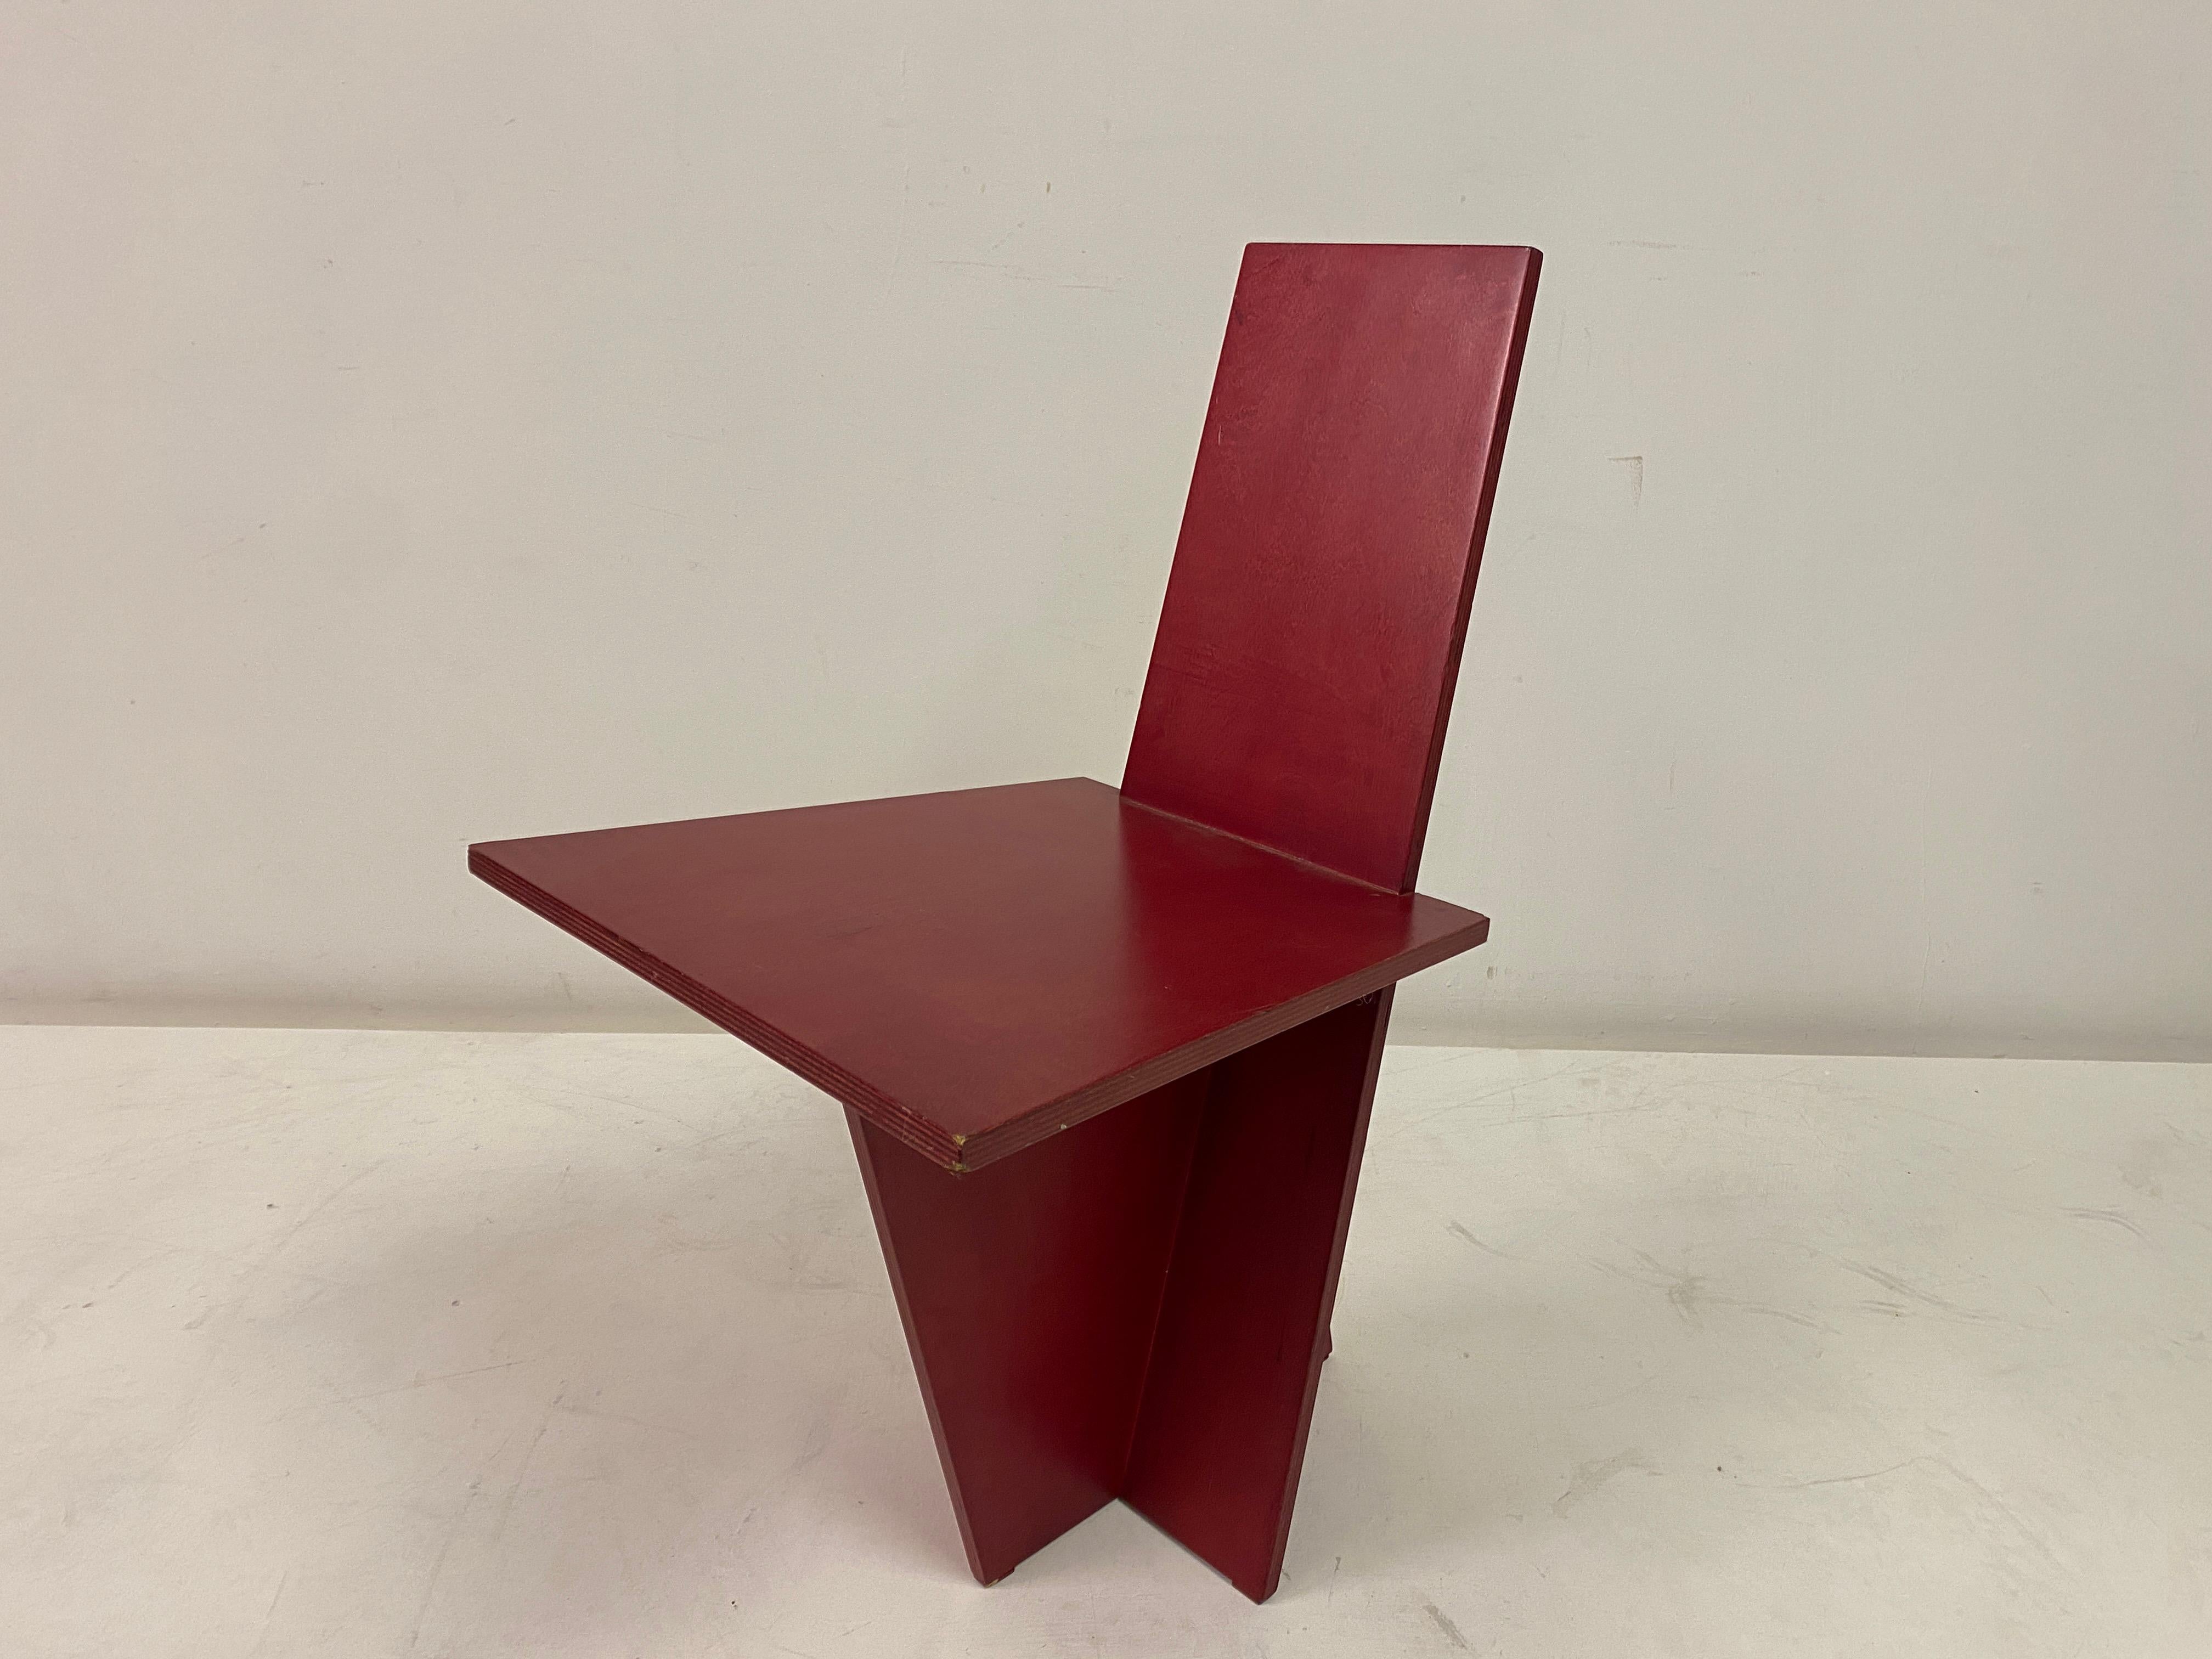 1980s Red Modernist Plywood Chair For Sale 2